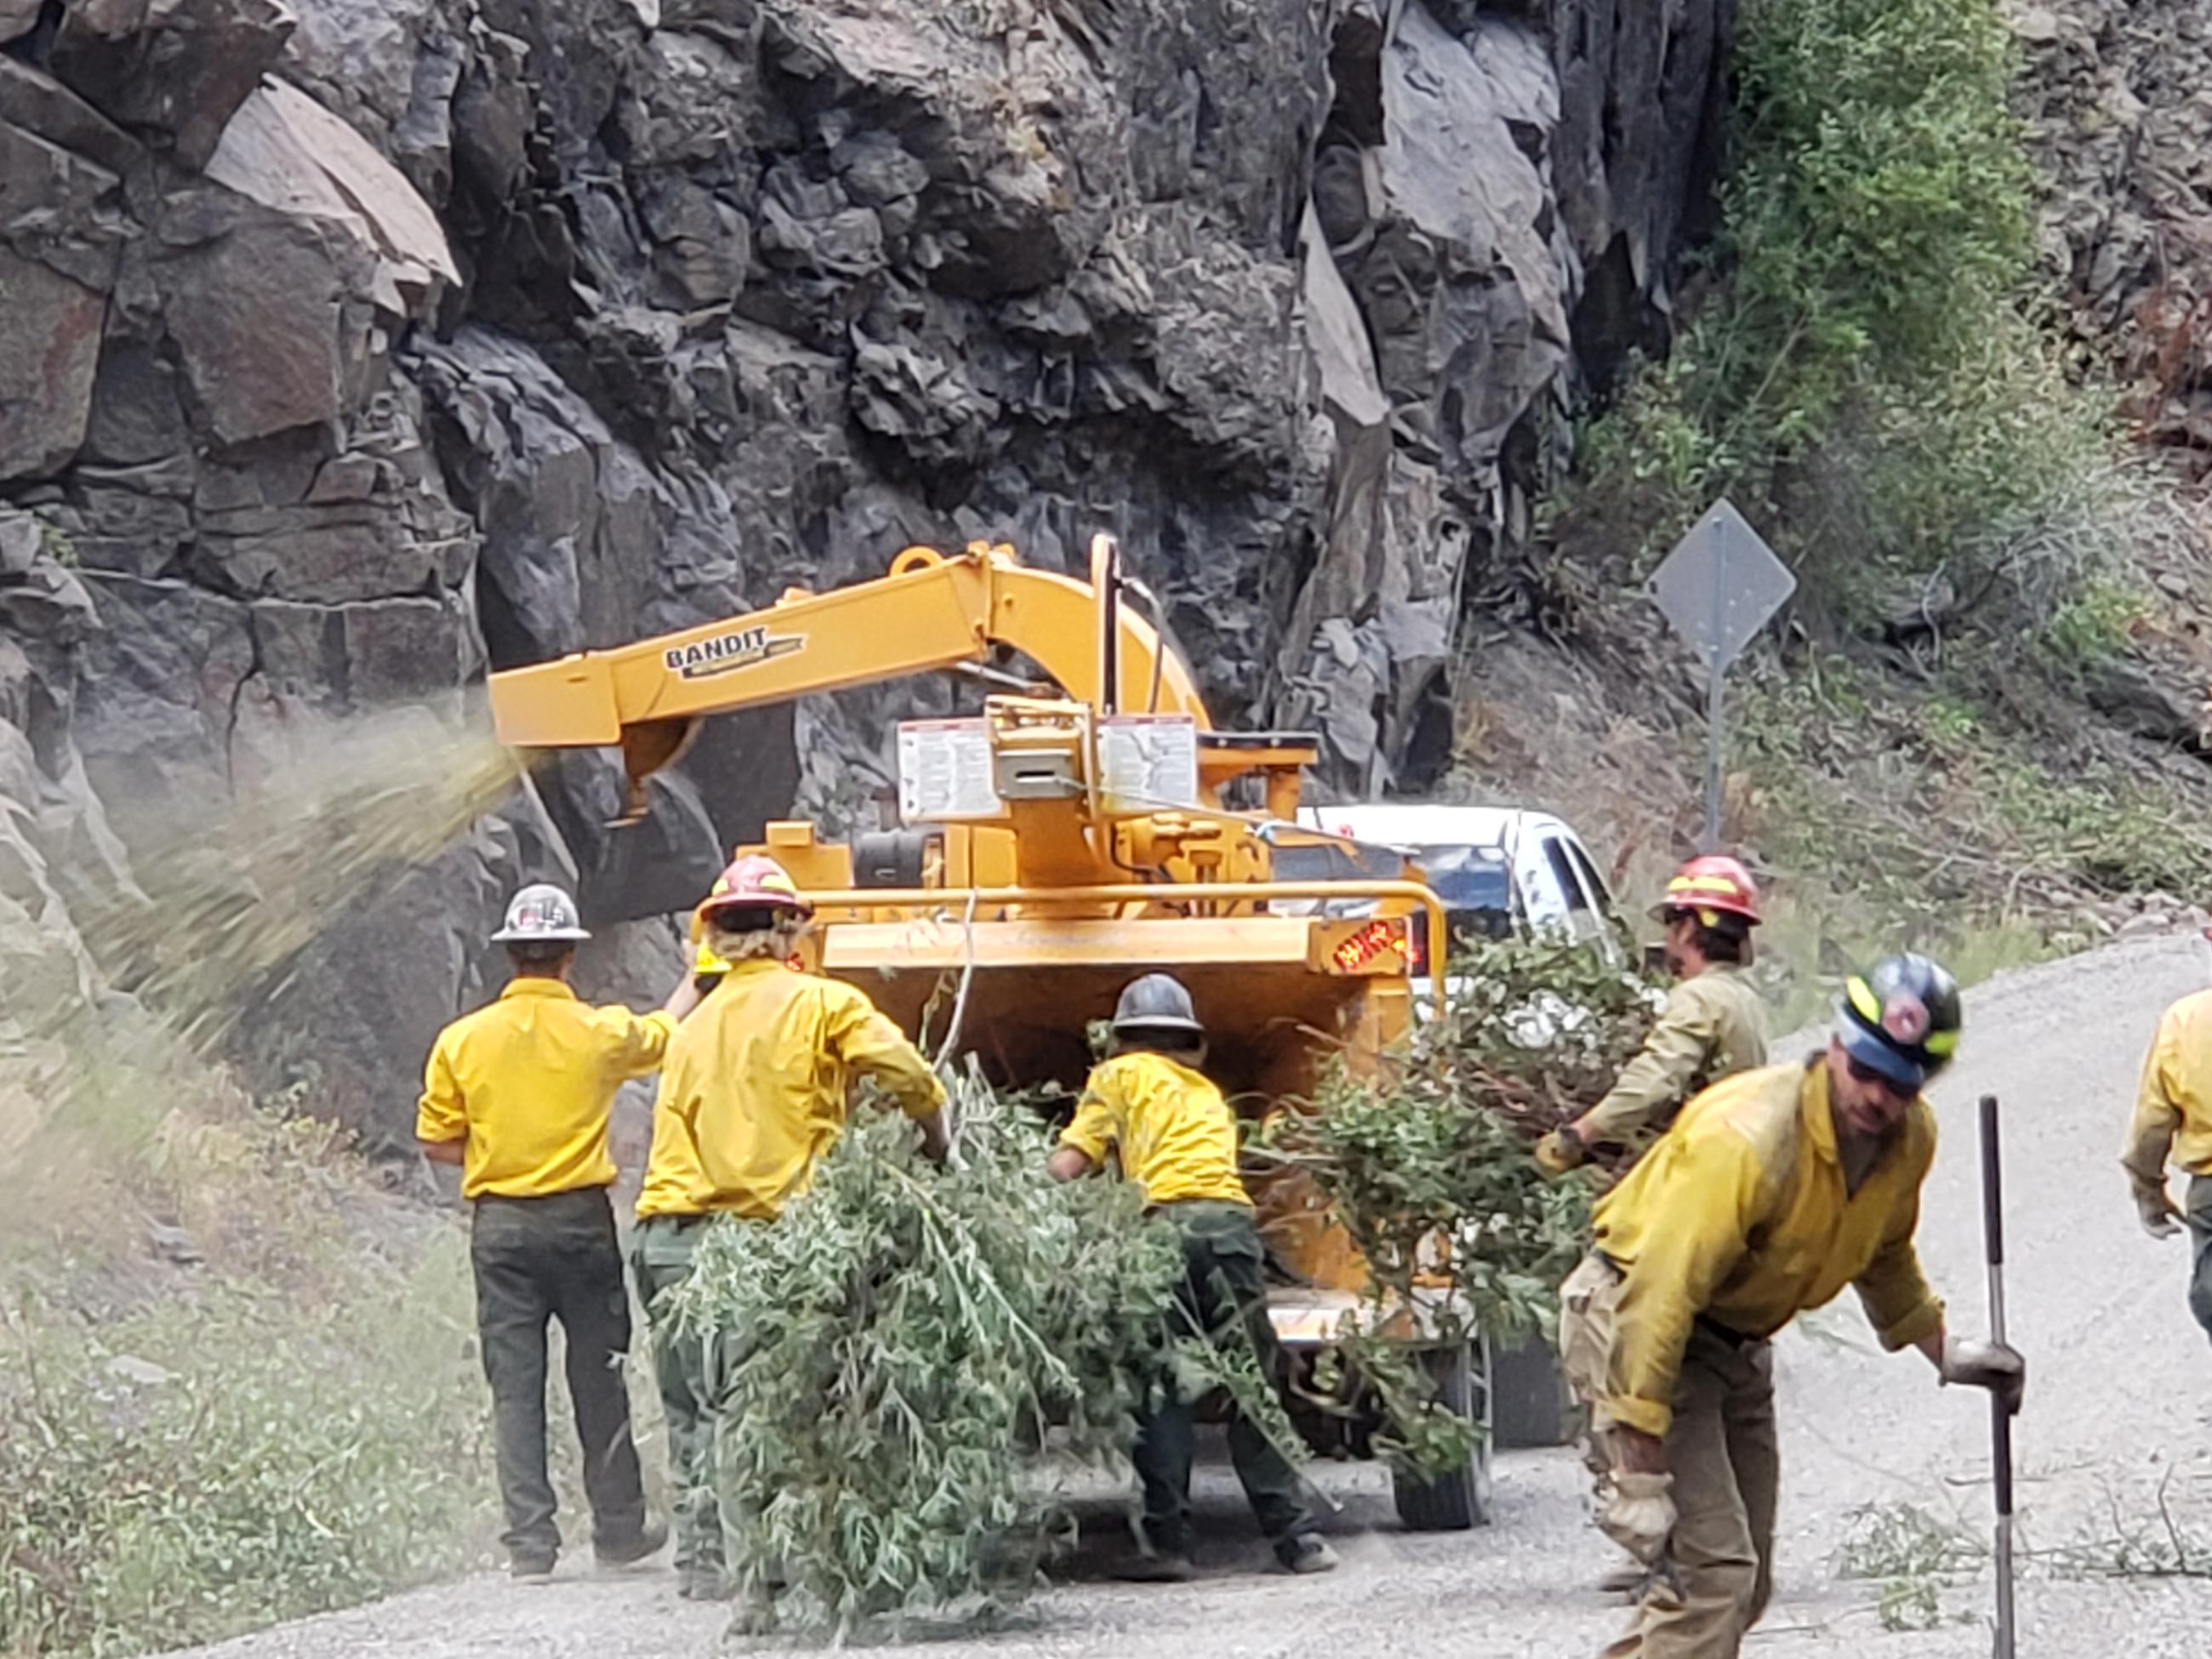 firefighters chip vegetation along a road to serve as potential fireline